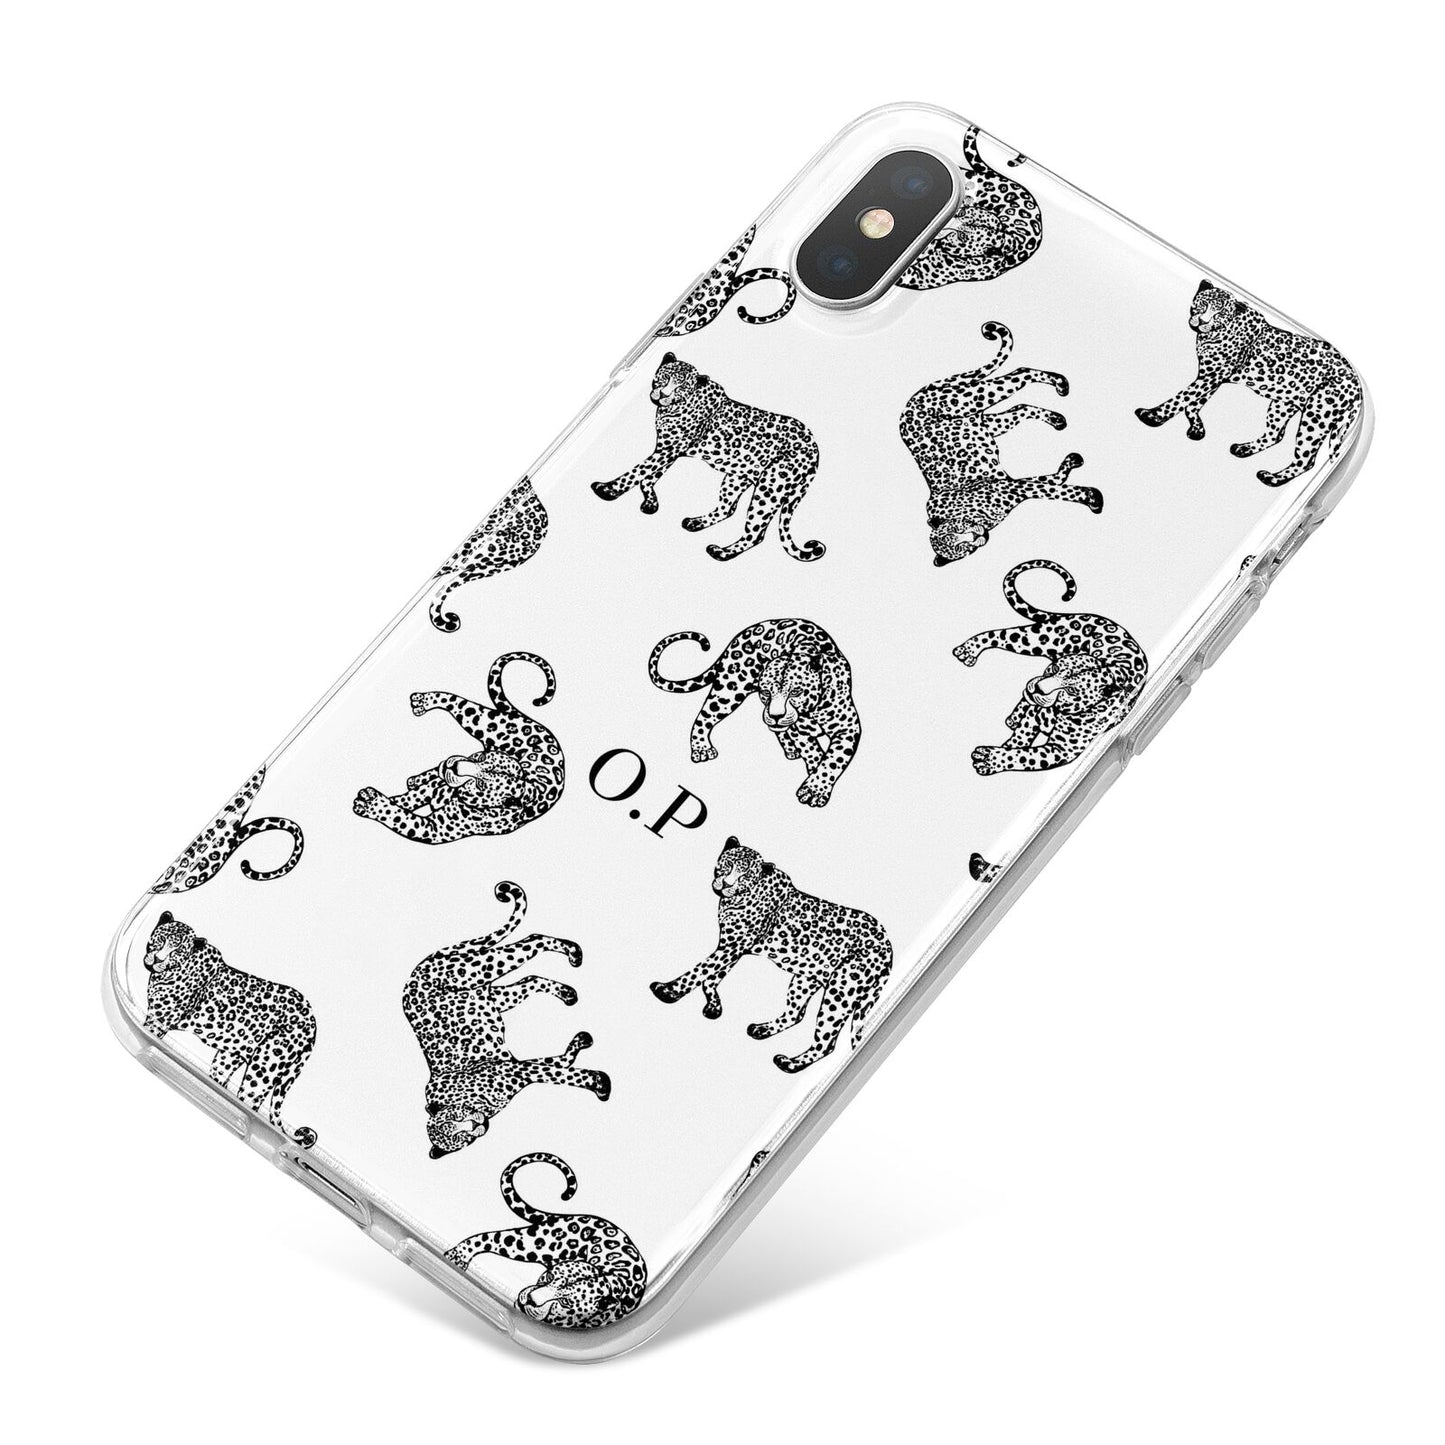 Monochrome Leopard Print Personalised iPhone X Bumper Case on Silver iPhone